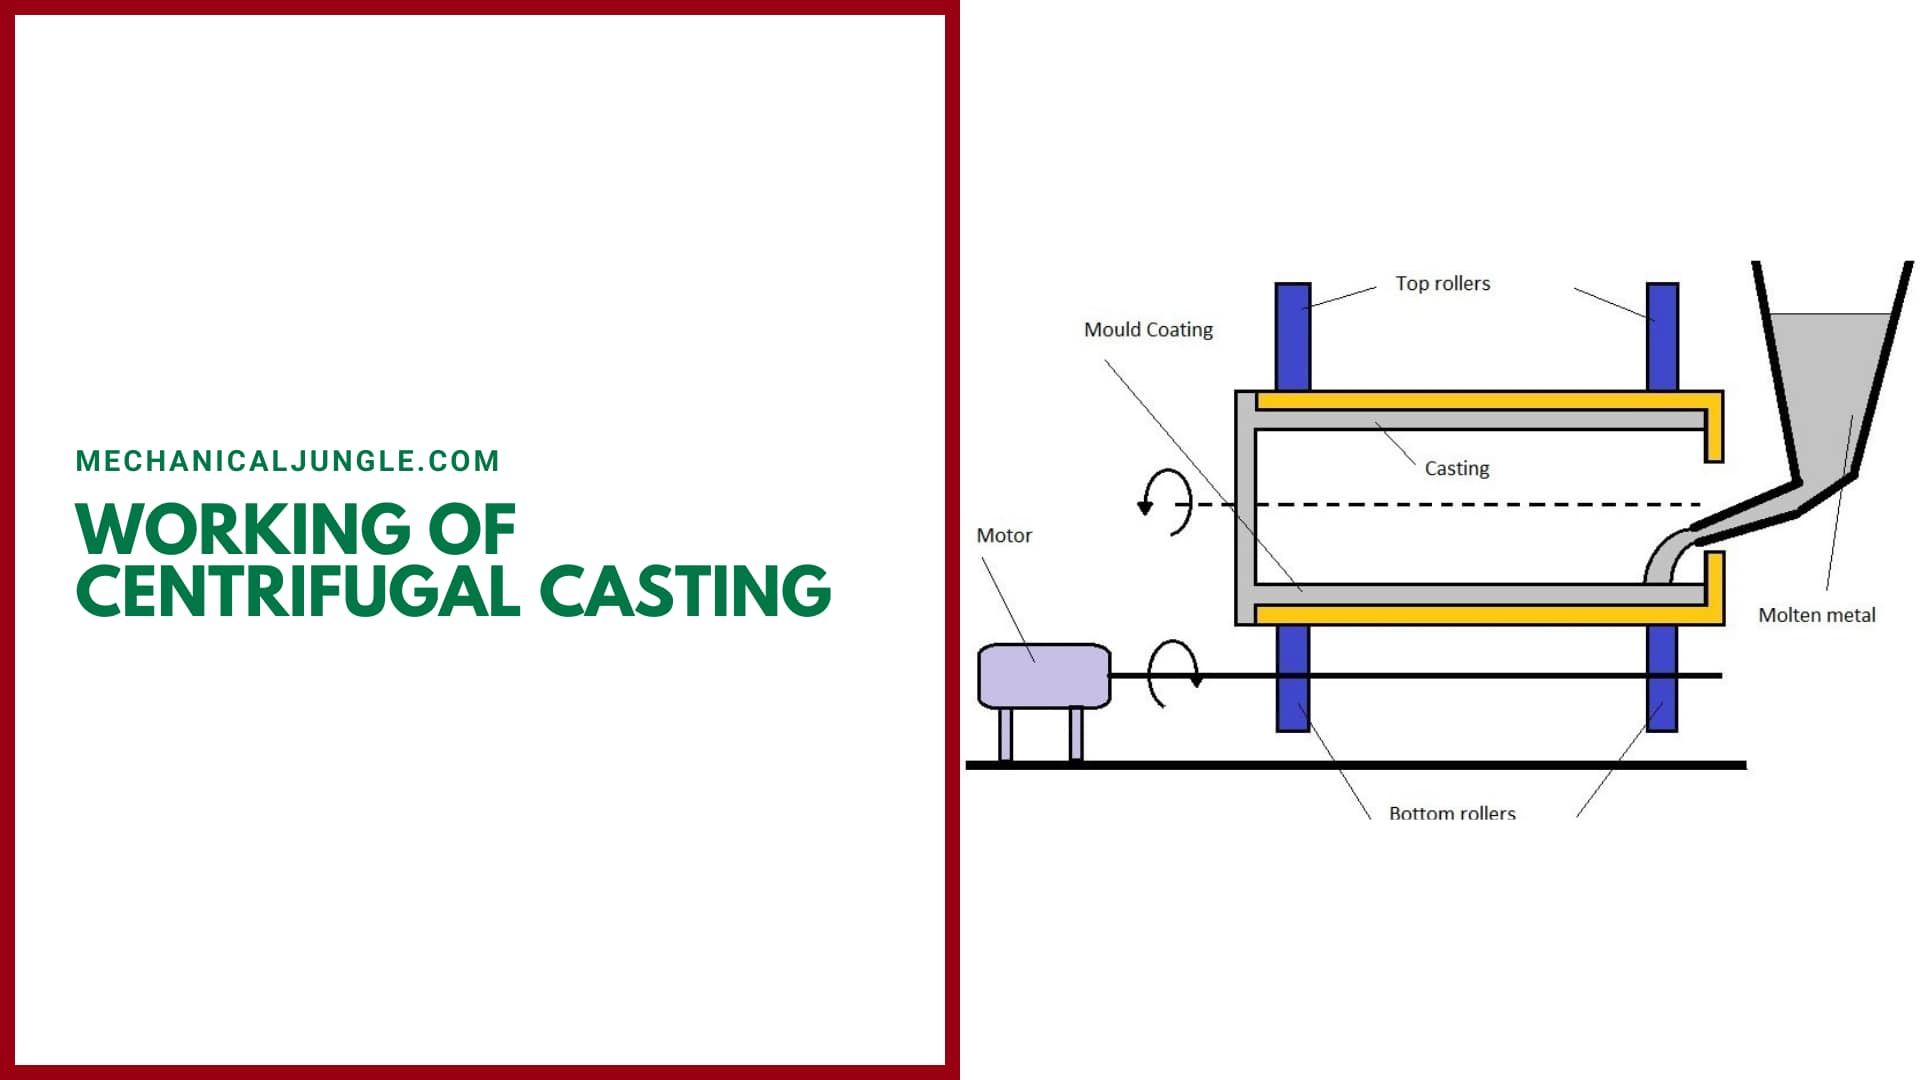 Working of Centrifugal Casting